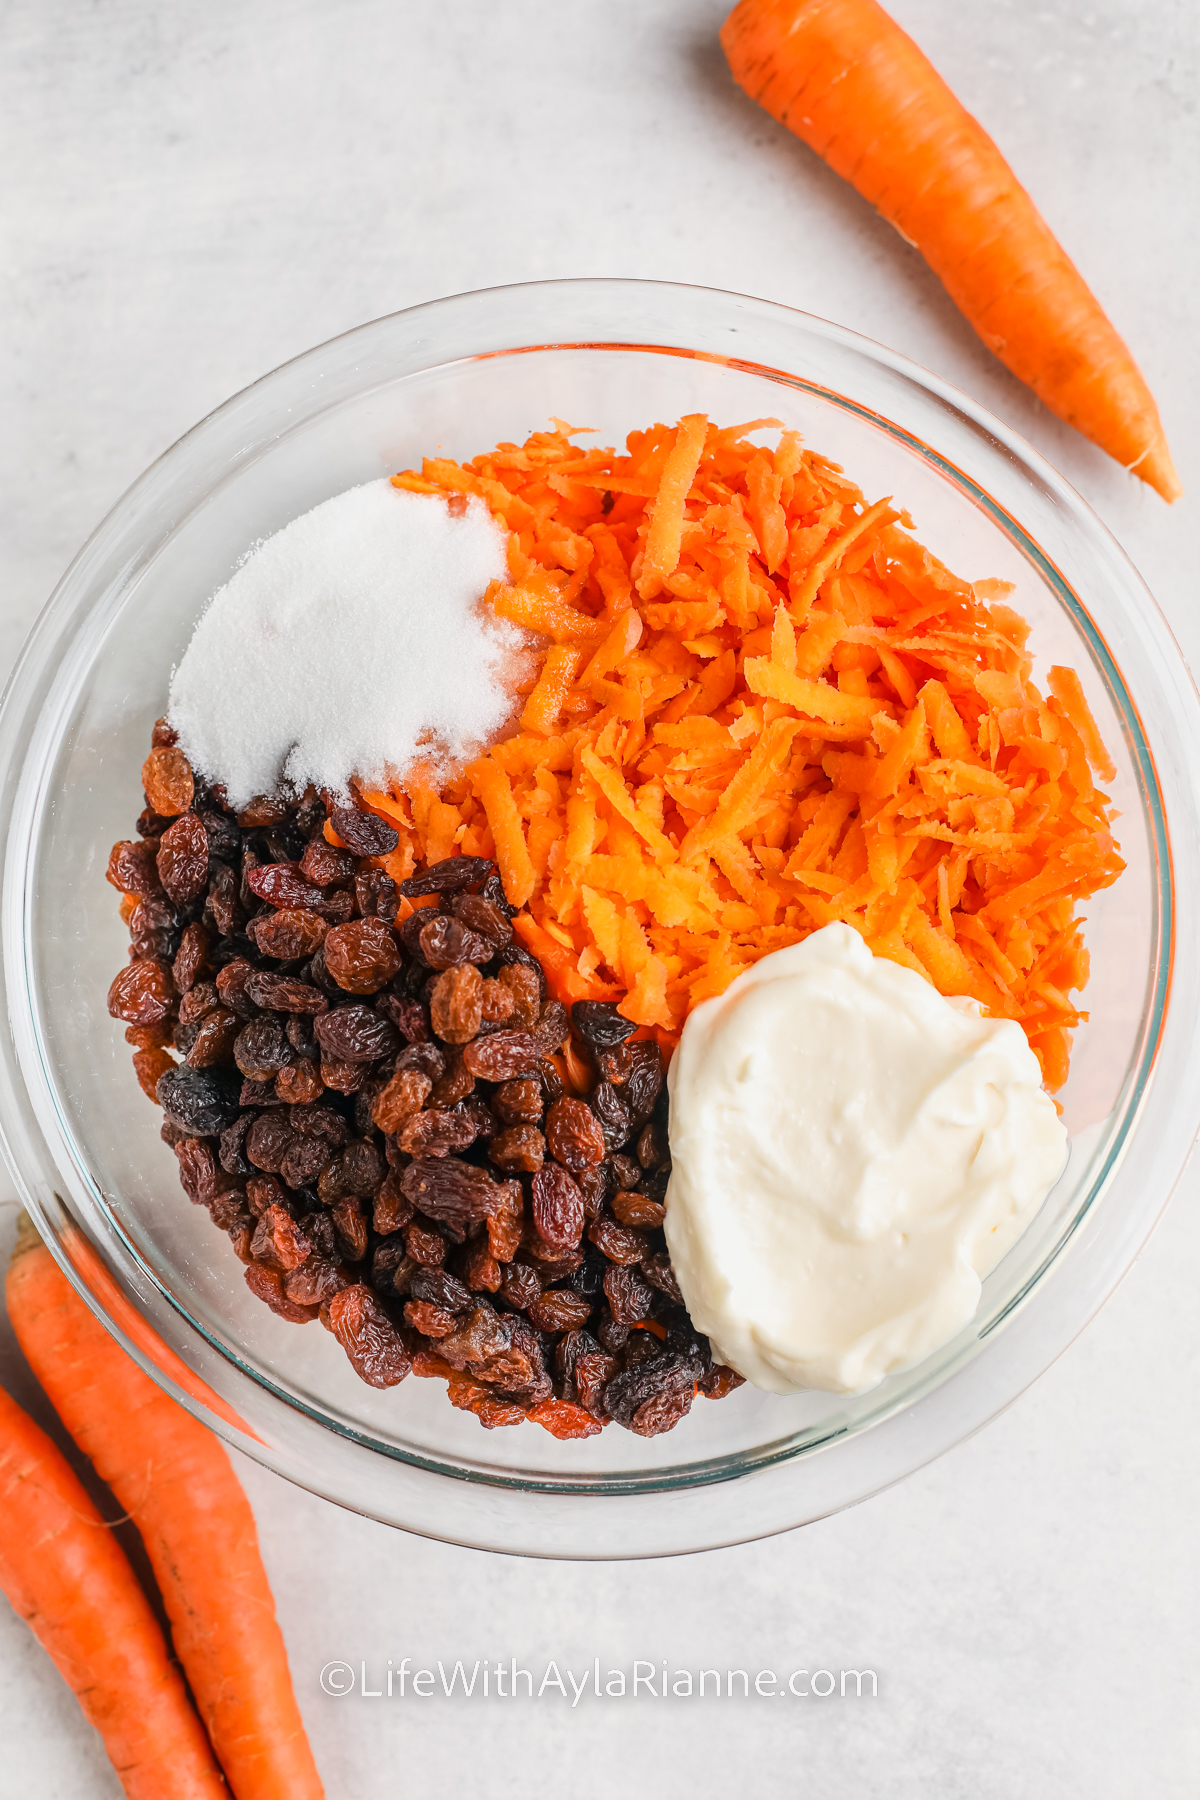 ingredients in a bowl to make Carrot and Raisin Salad